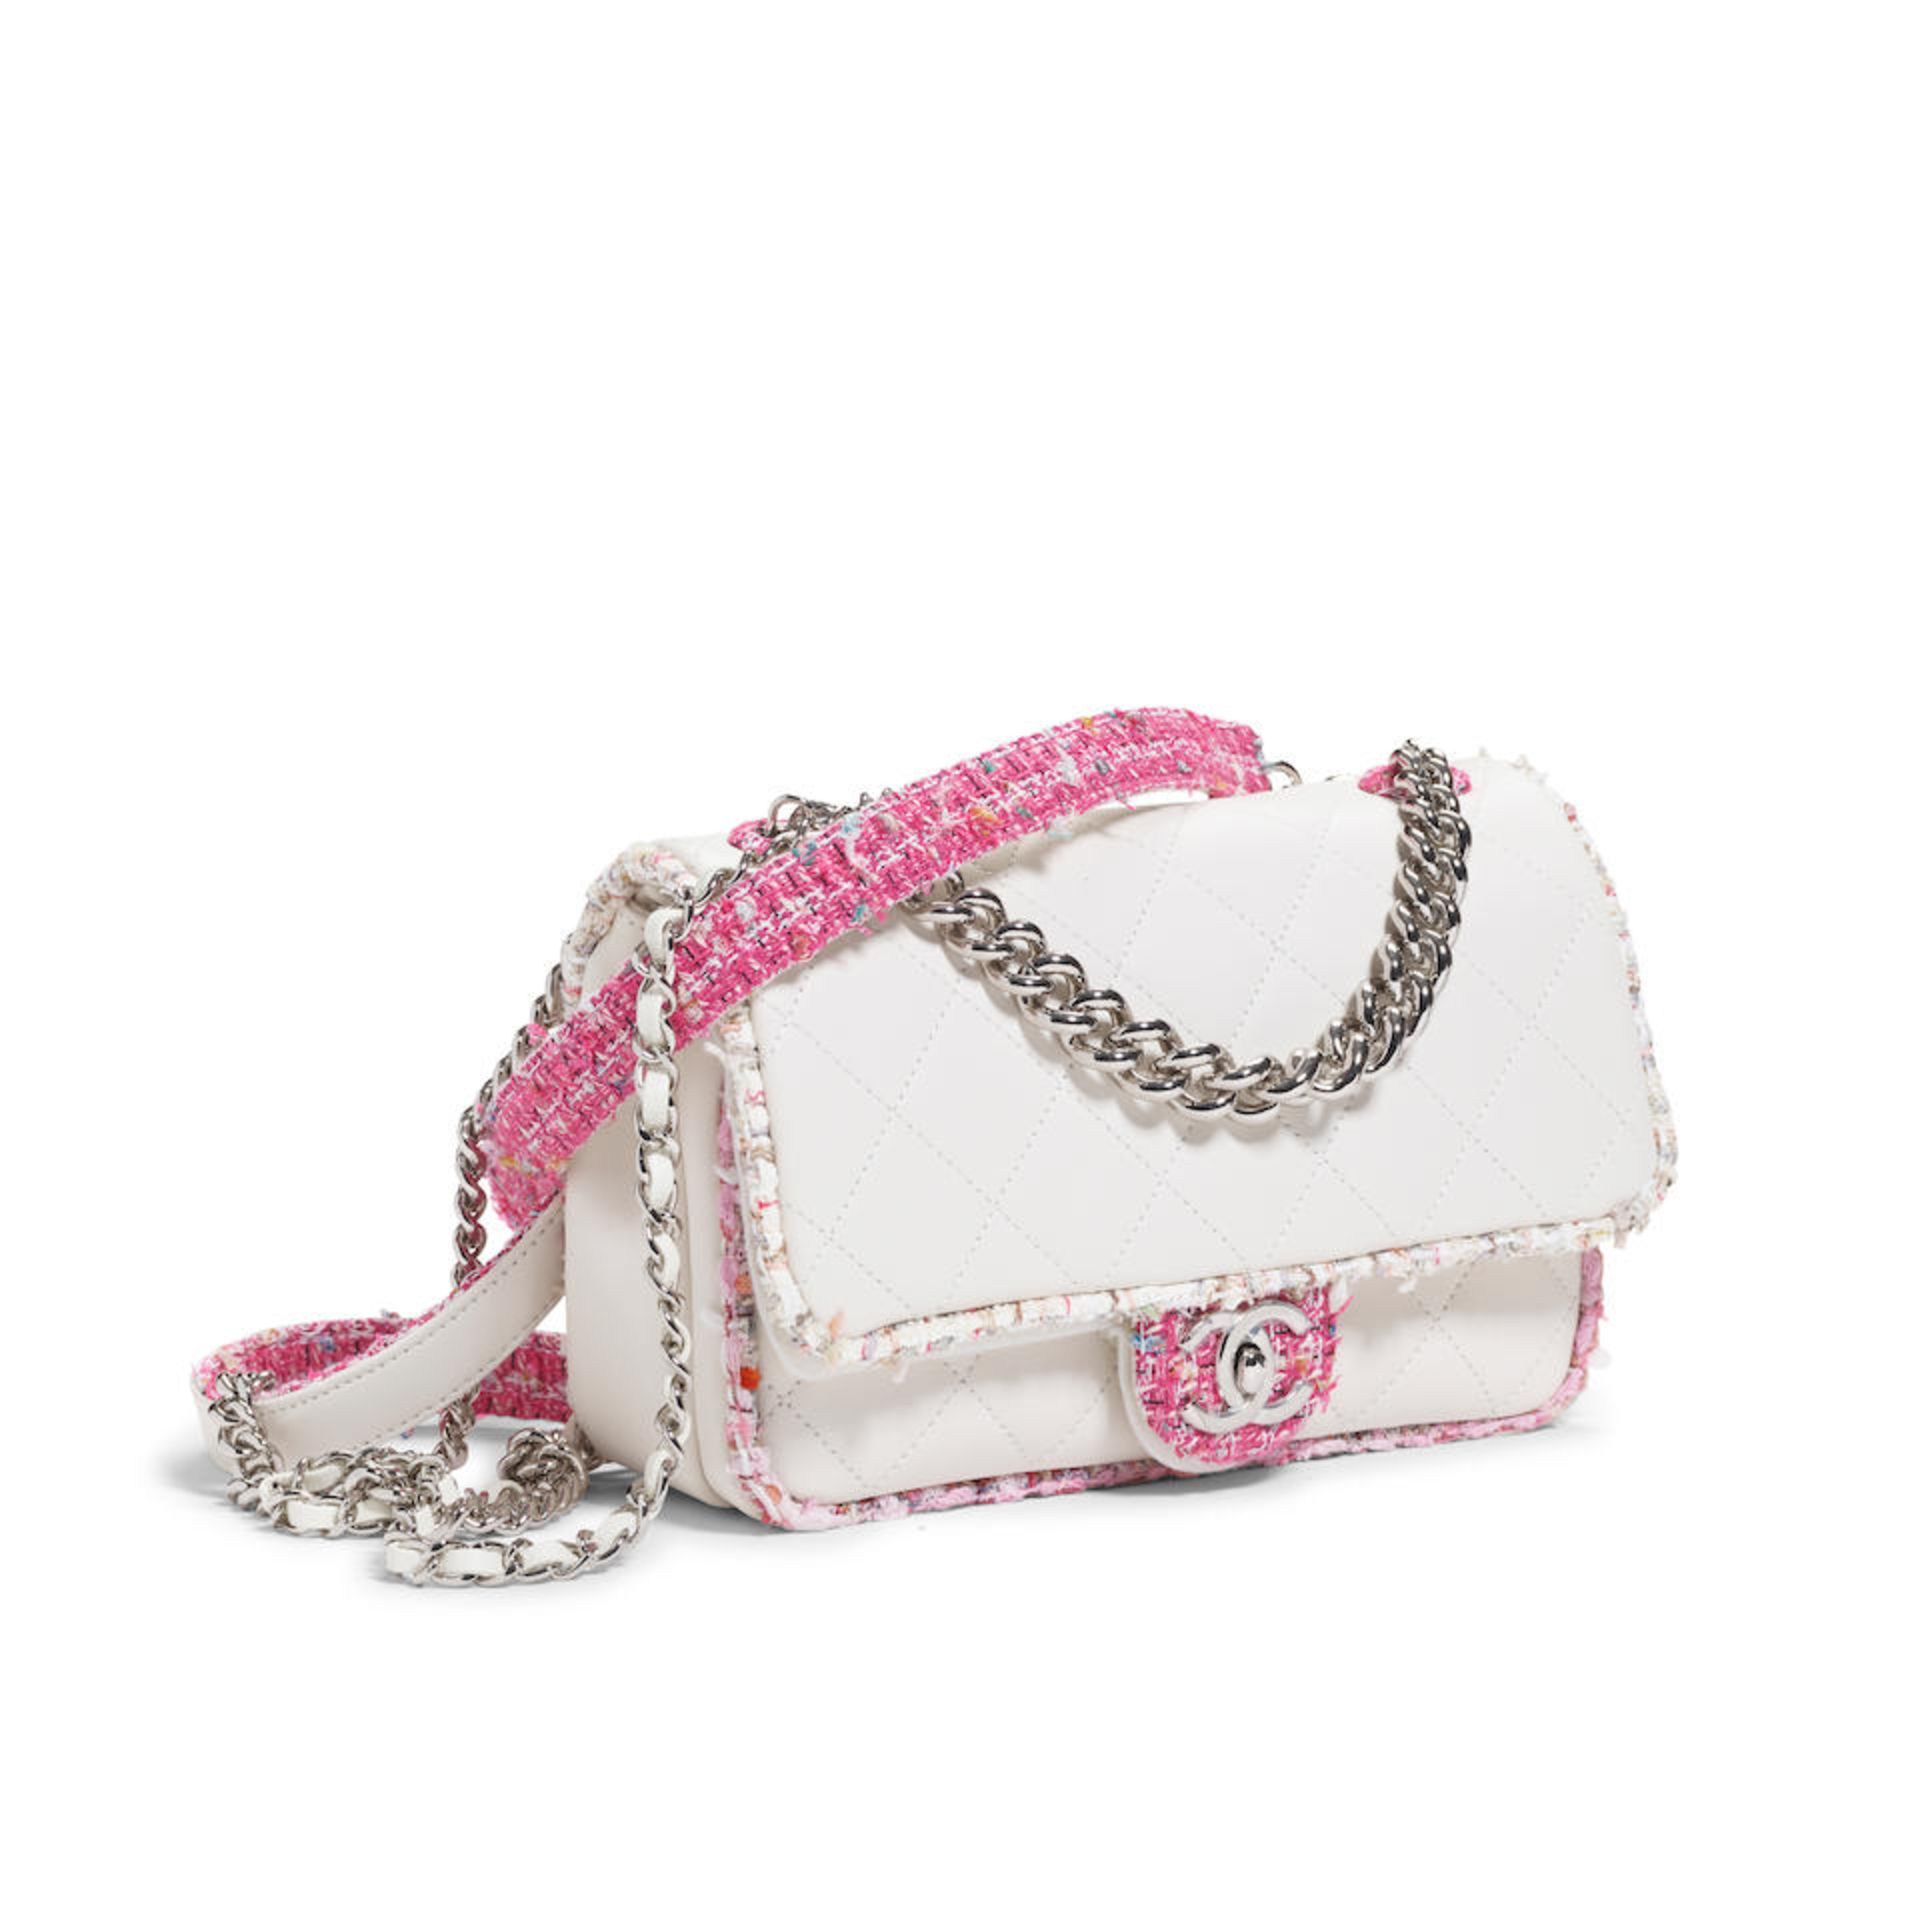 CHANEL: TWEED QUILTED ELEGANT TRIM DOUBLE FLAP Spring 2019